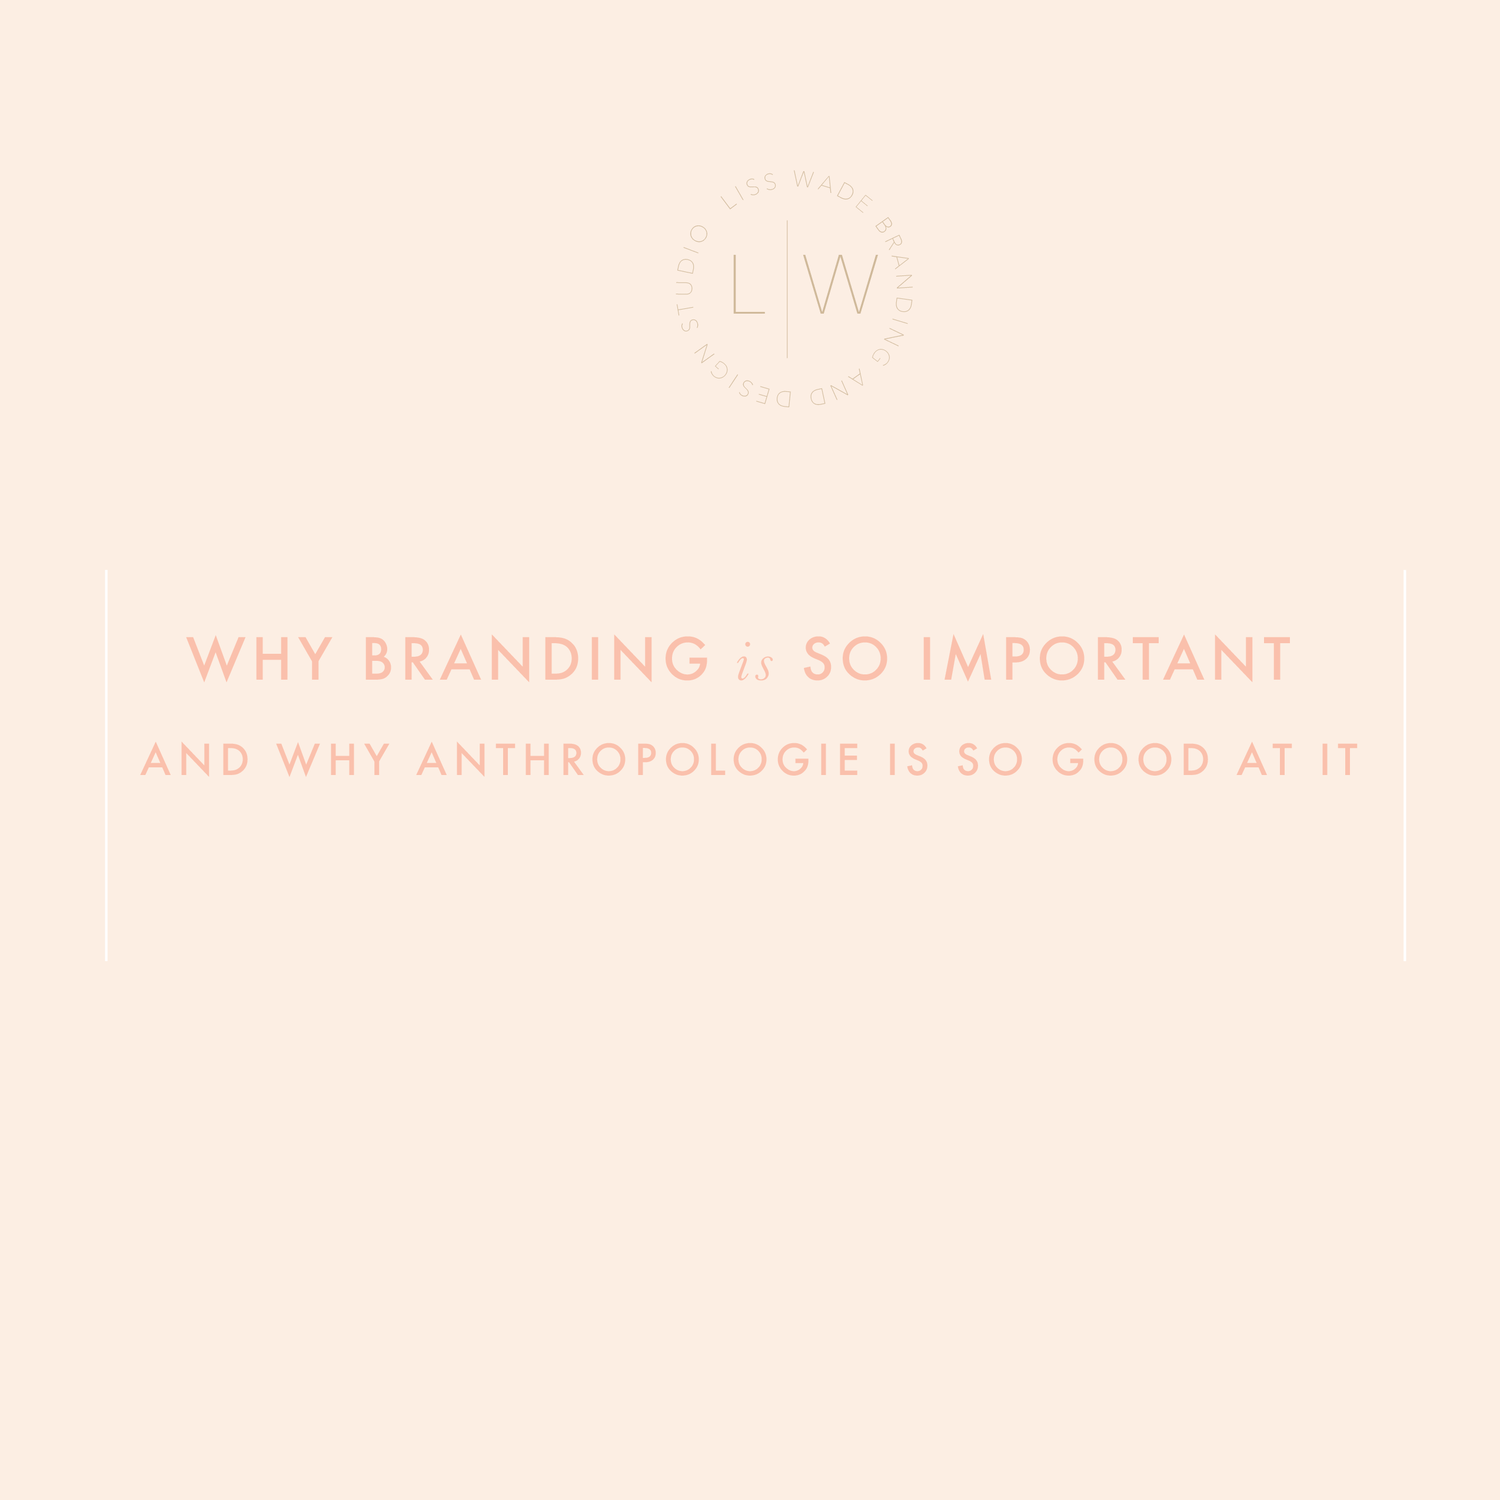 Antropologie Logo - Why branding is so important and why Anthropologie is so good at it